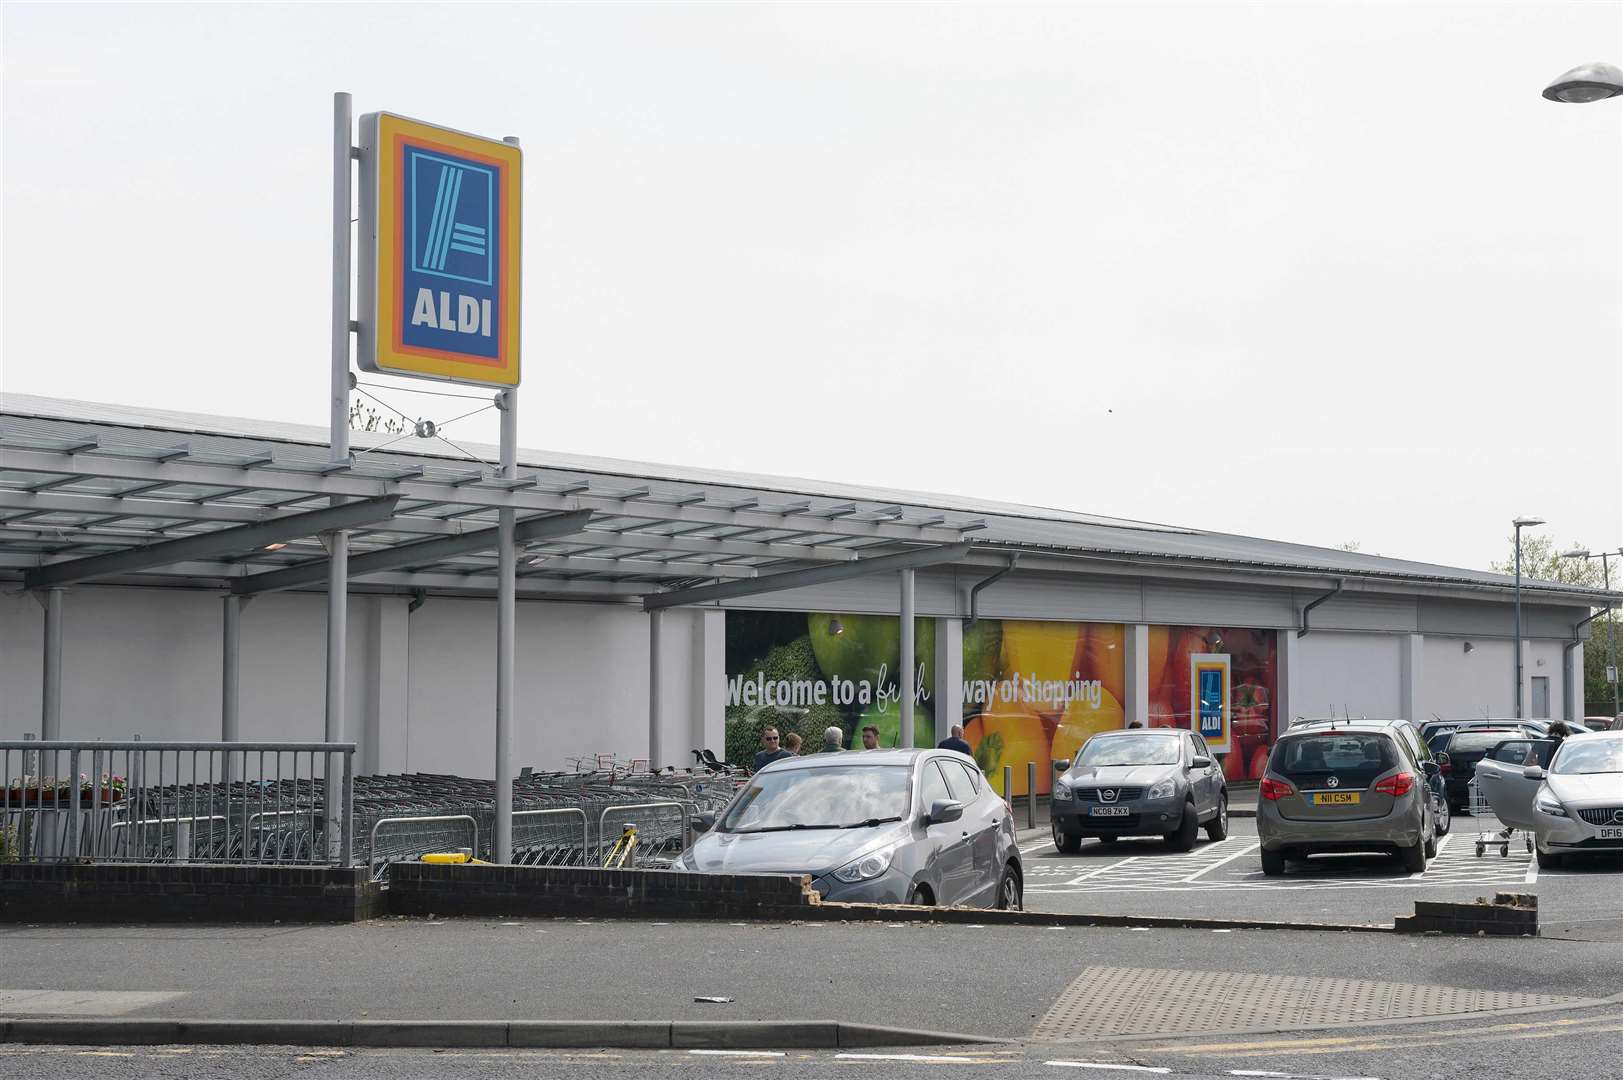 The Aldi Store on London Road, Northfleet, where a car went through a brick wall into the car park